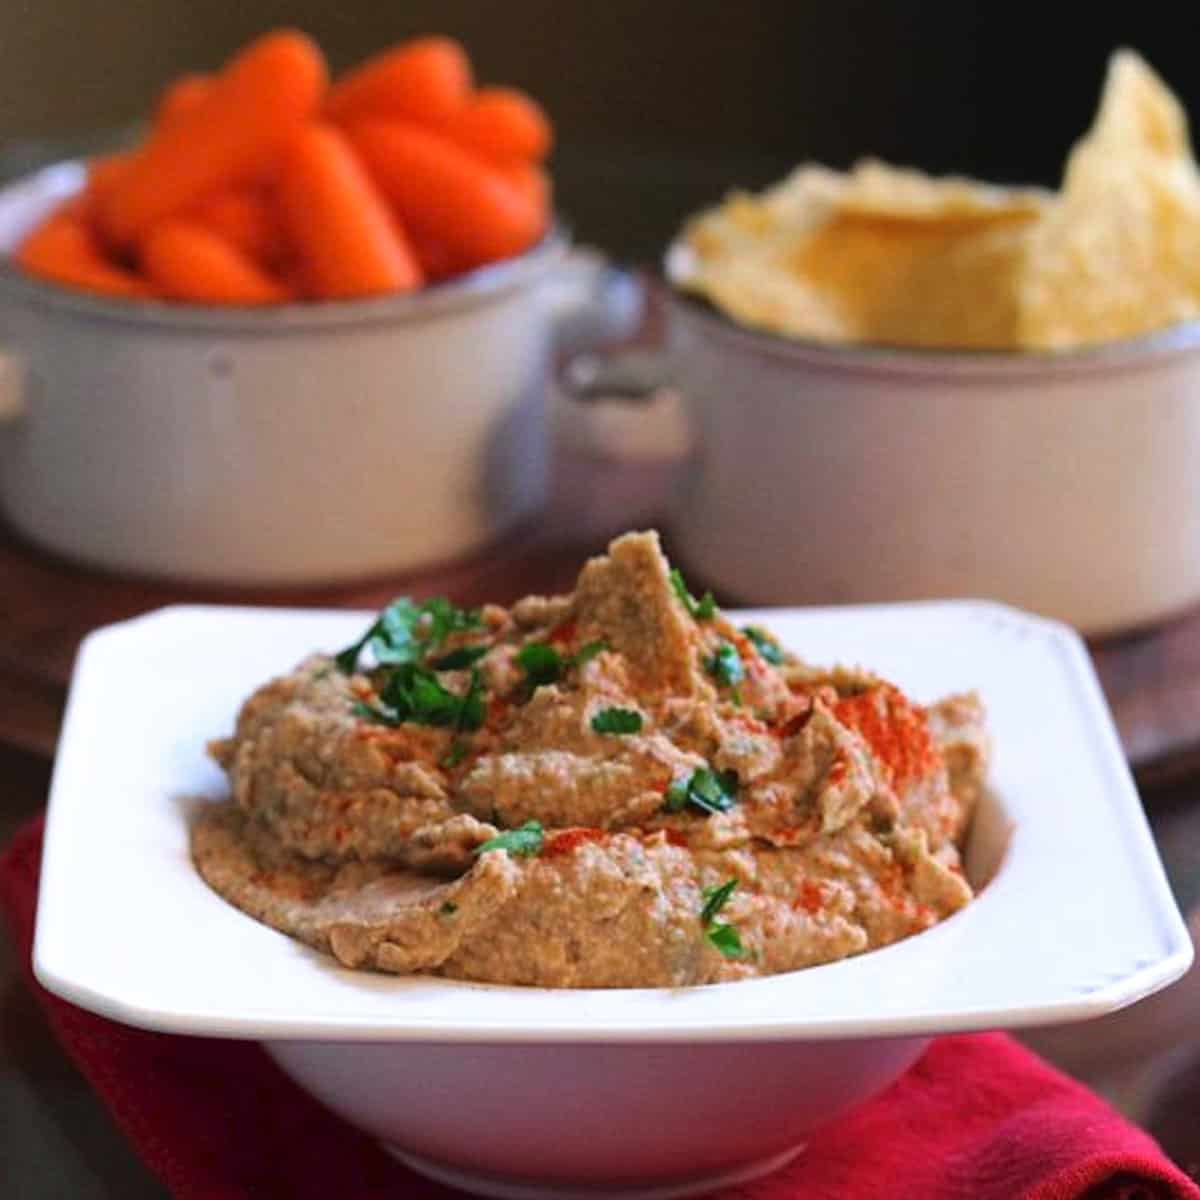 a bowl of black eyed pea hummus next to a red napkin and a bowl of carrots.